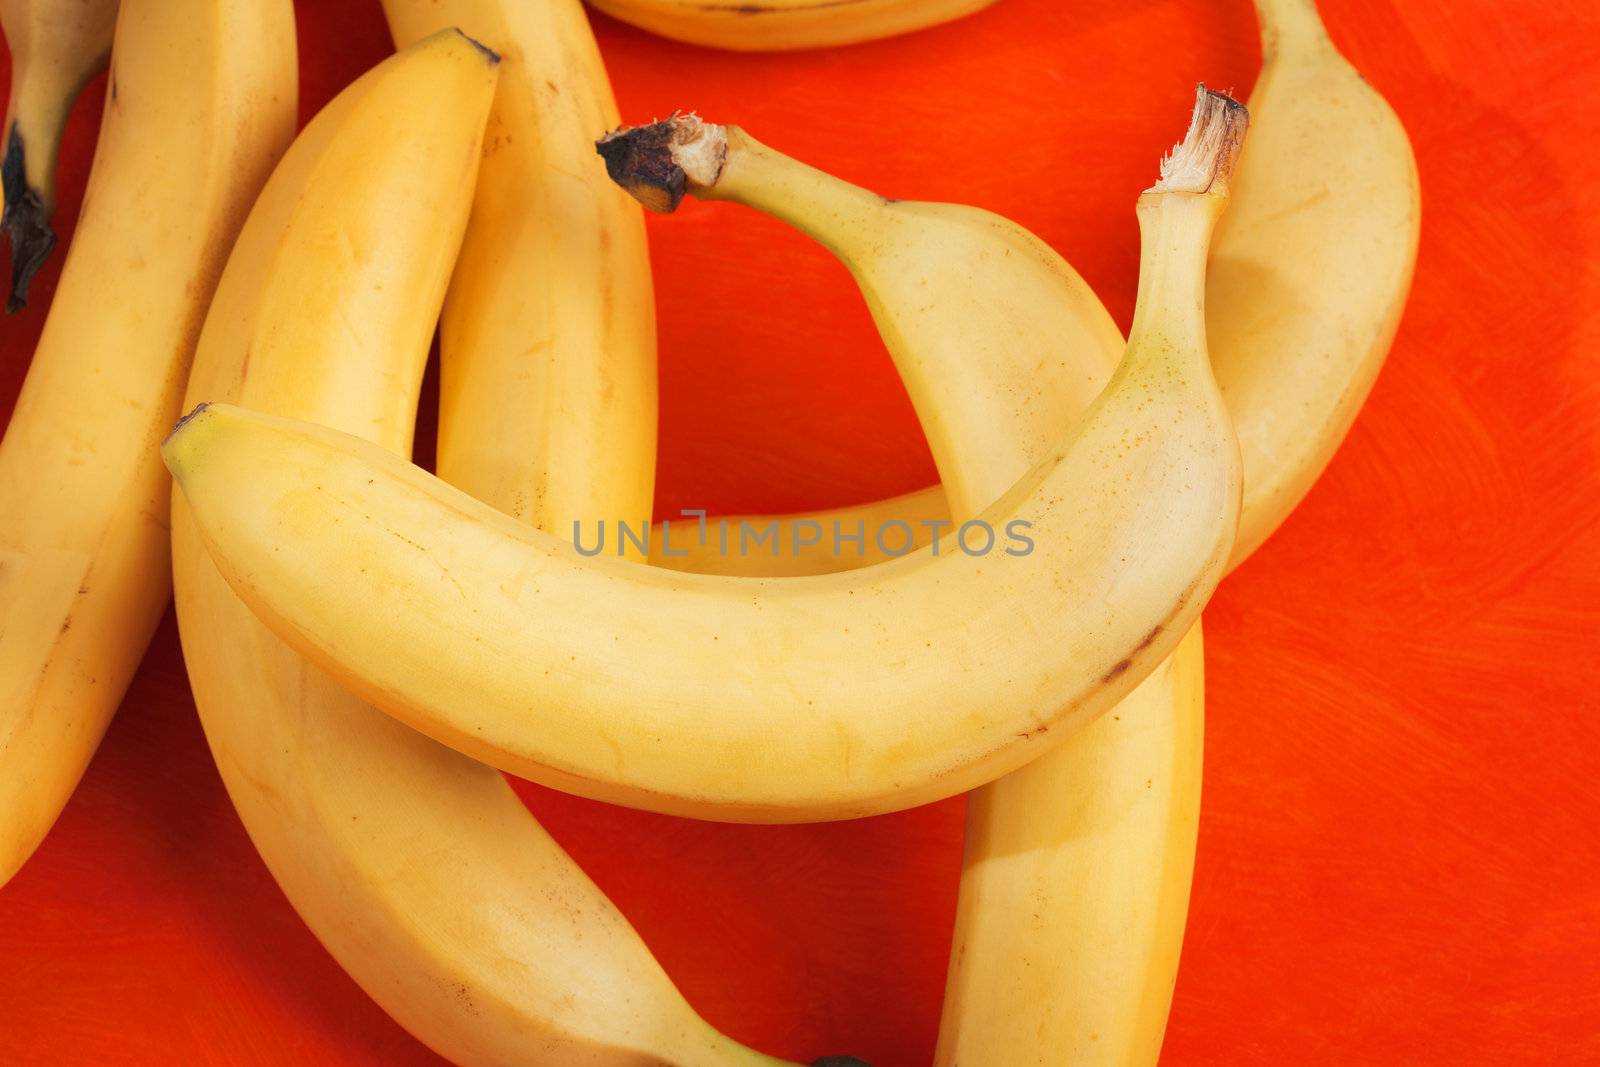 Bananas on a yellow background